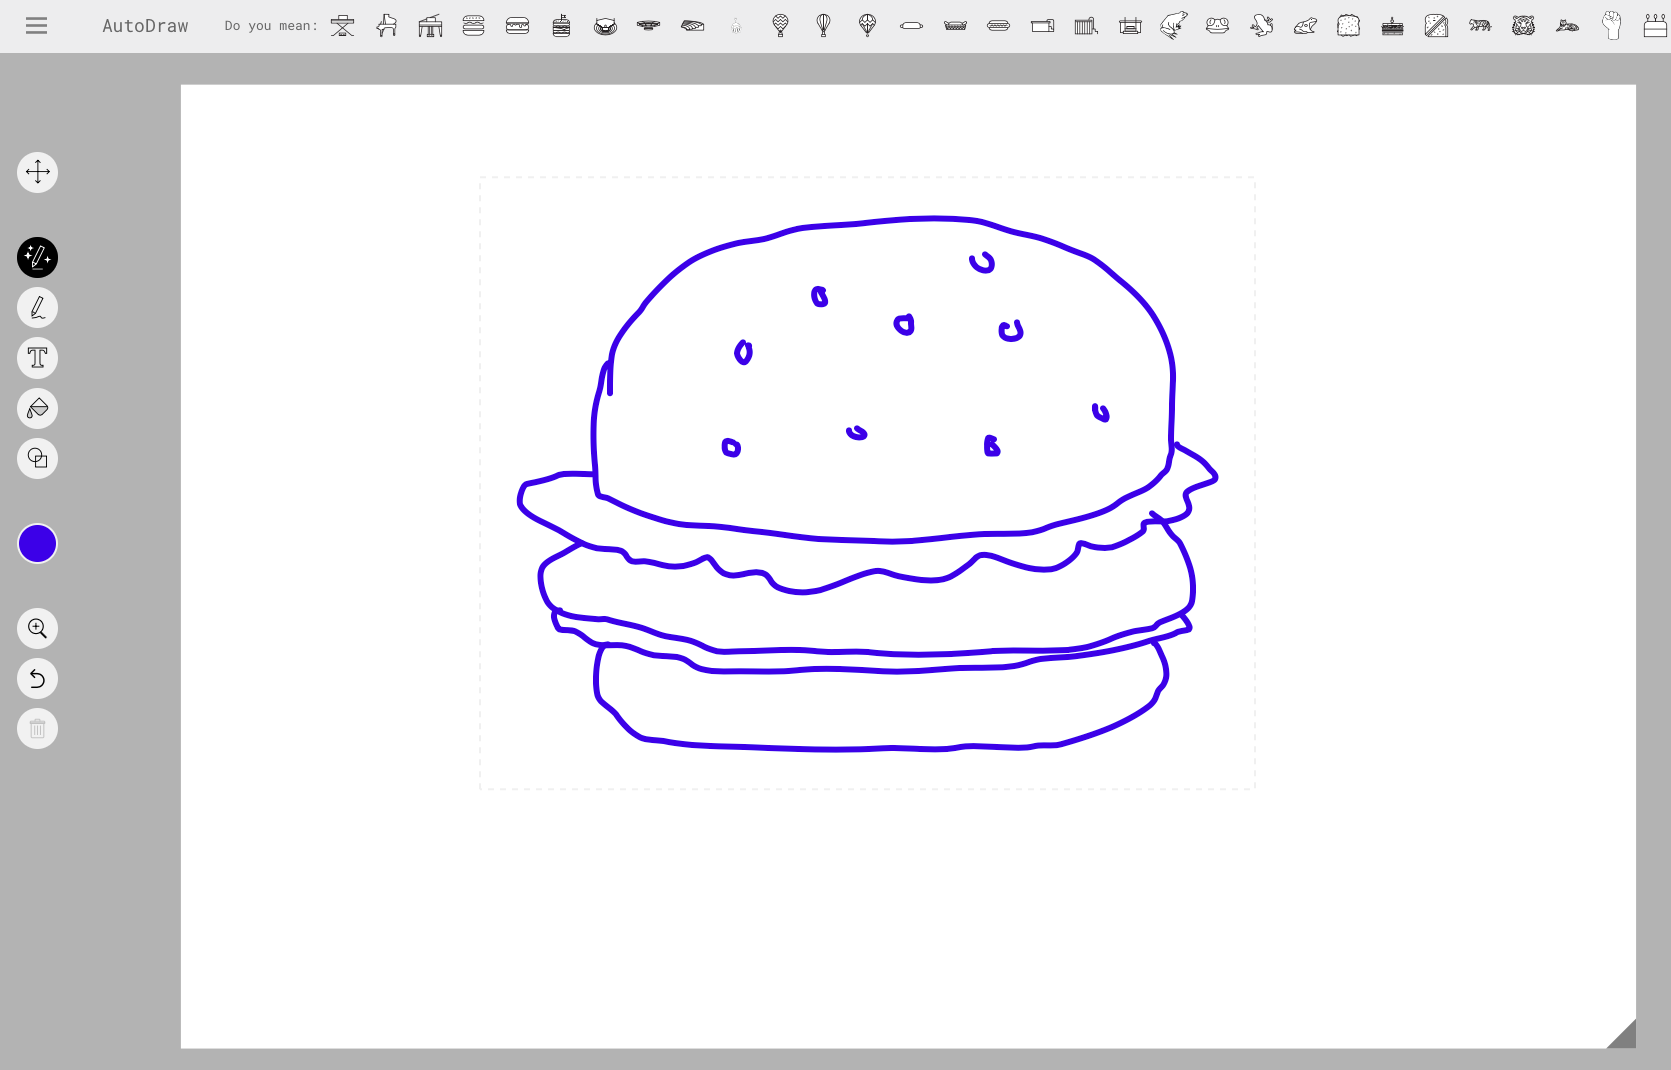 Sketching with Google AutoDraw 